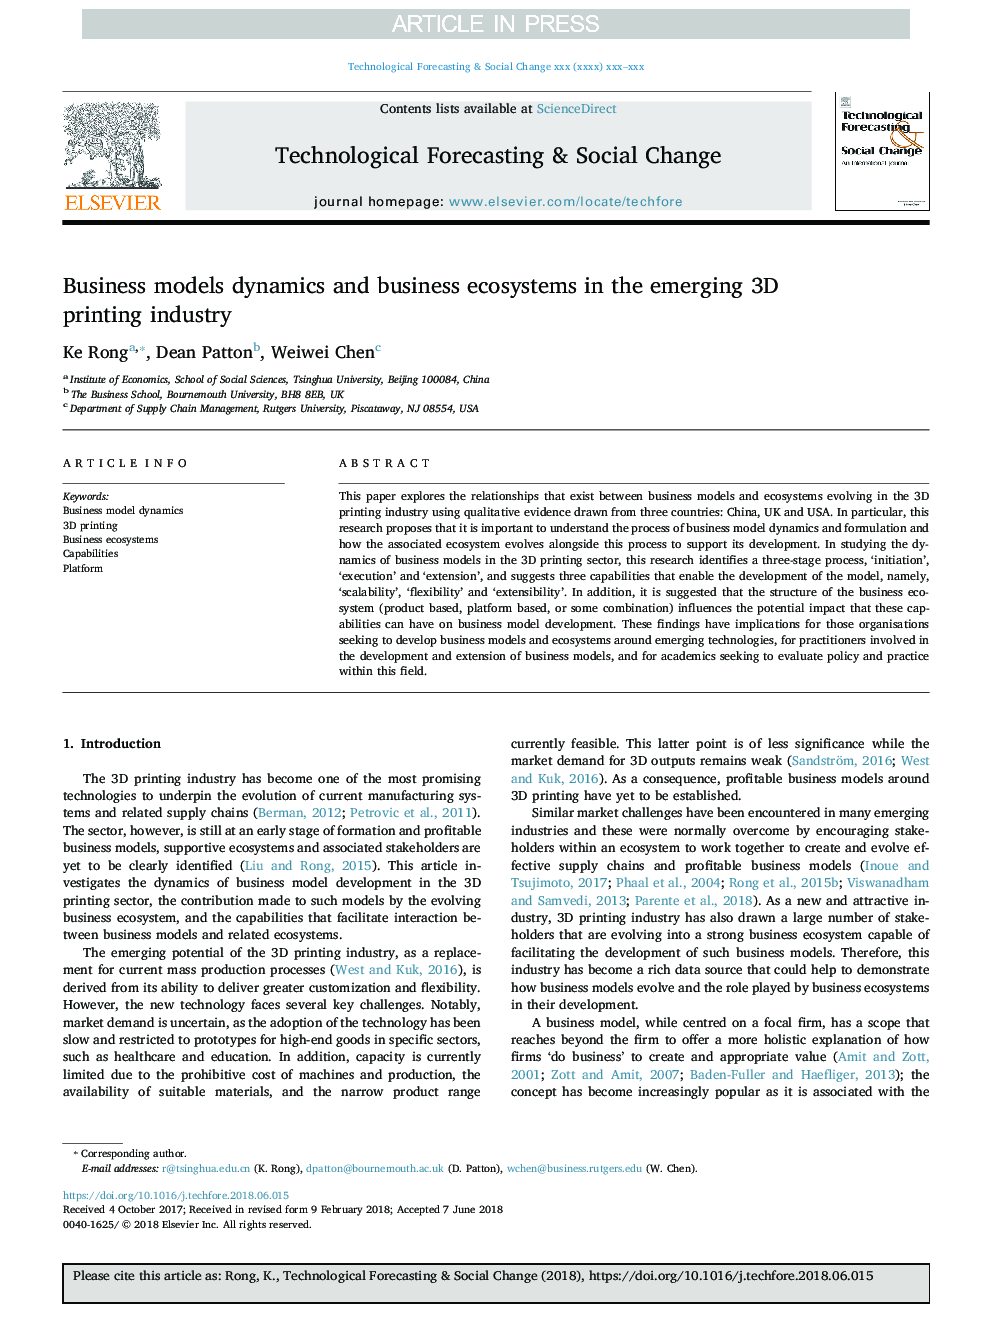 Business models dynamics and business ecosystems in the emerging 3D printing industry